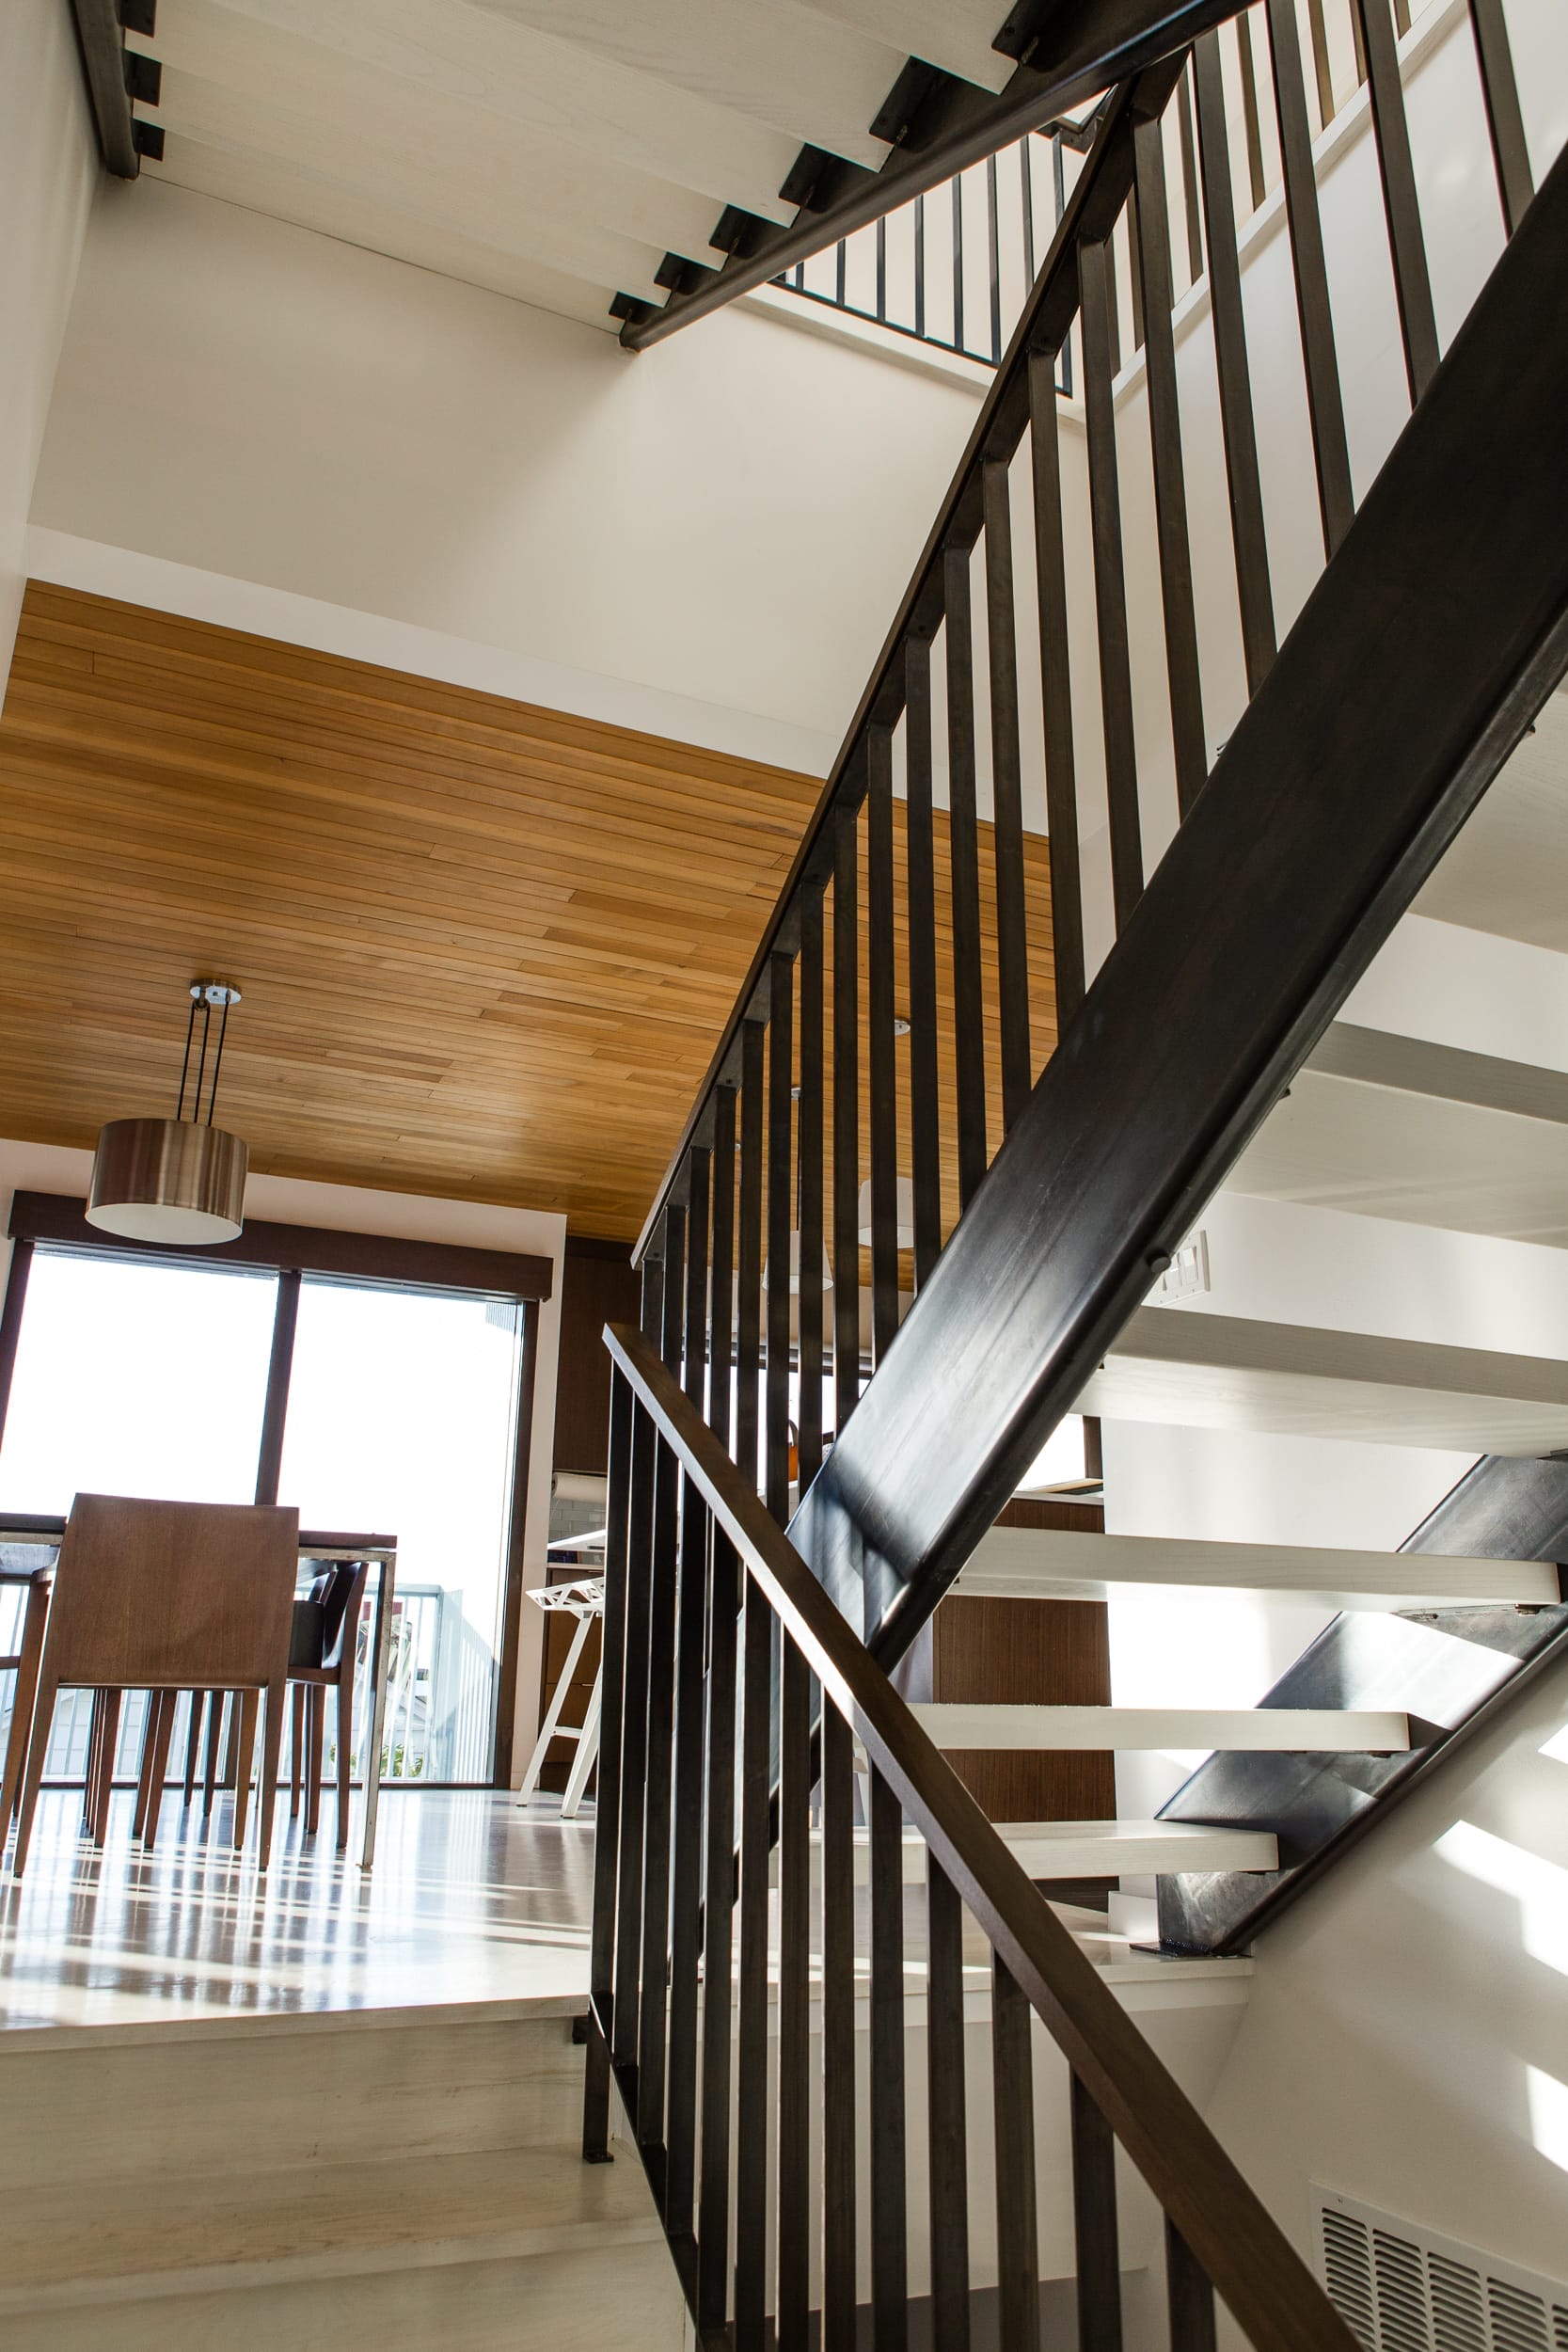 A modern home with a beautifully crafted staircase designed and built by a skilled carpenter.